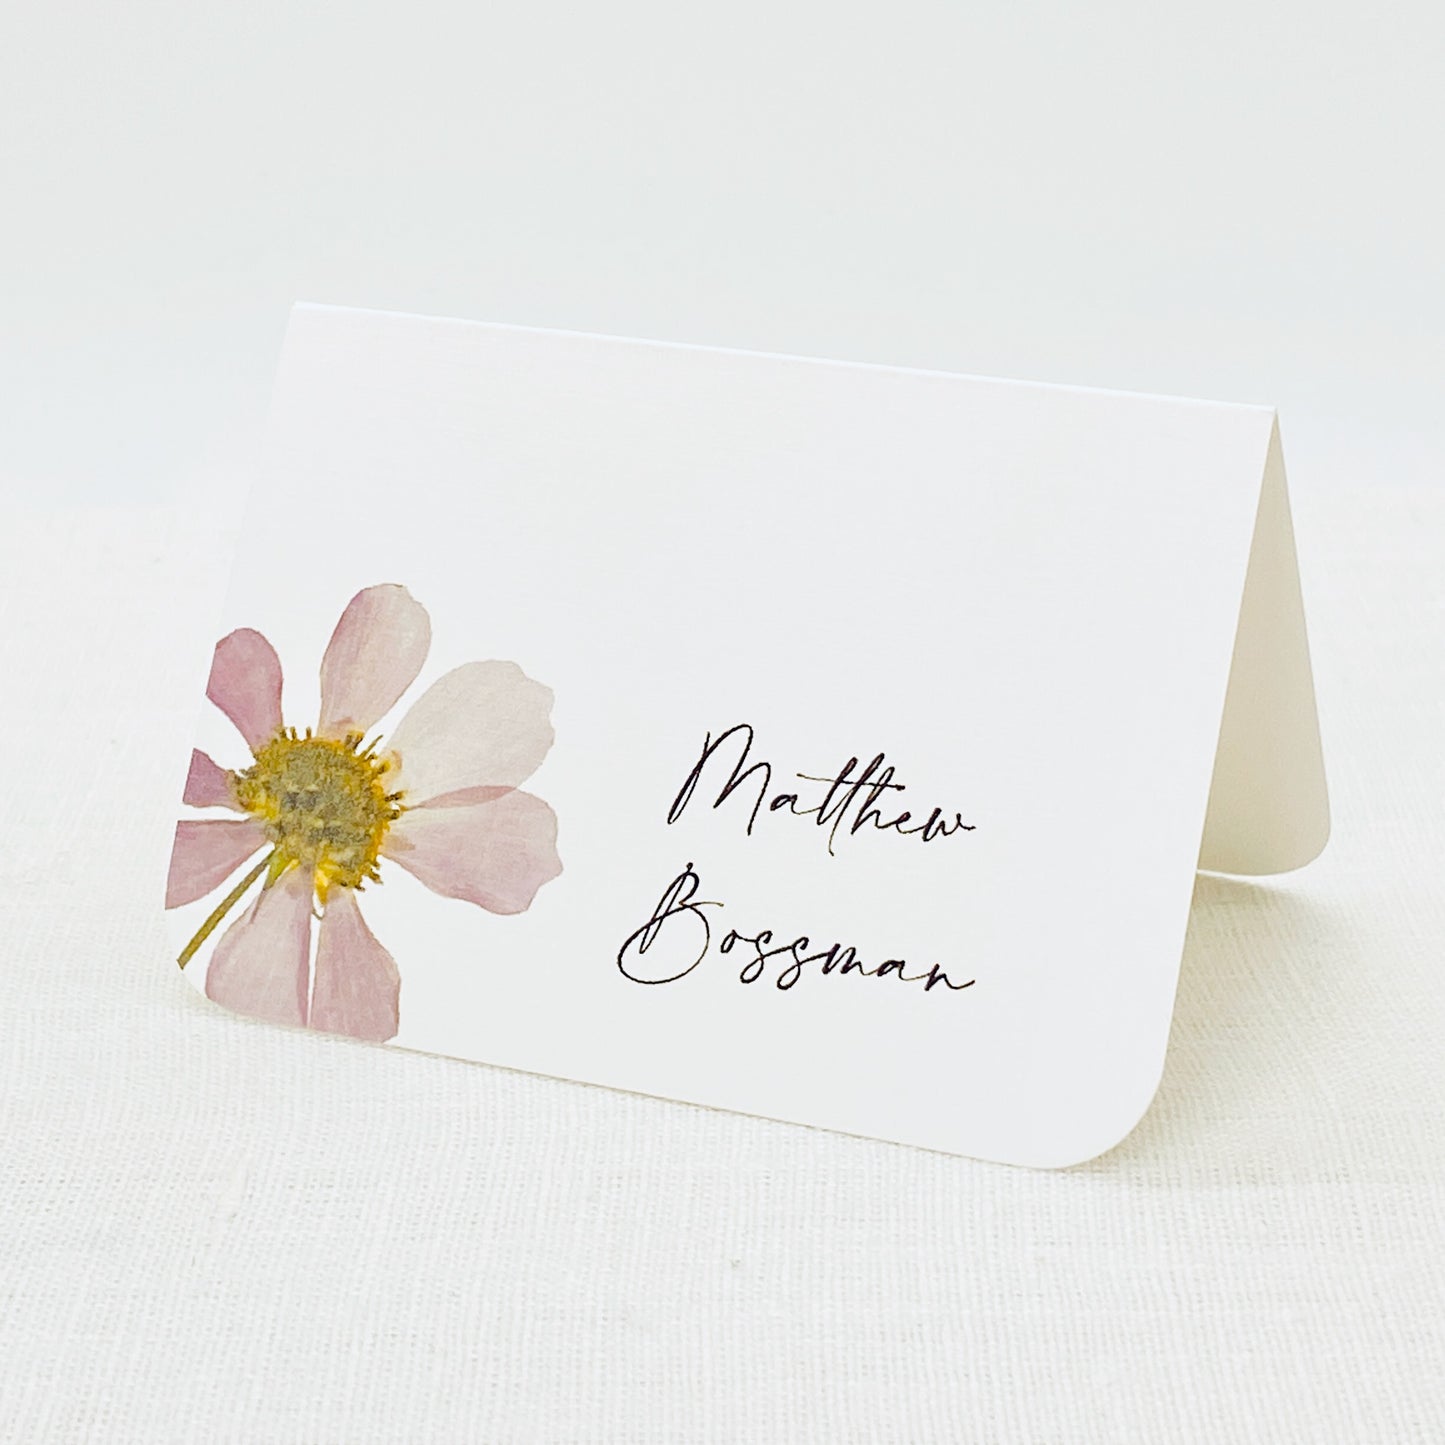 Place Cards with Pressed Flower Illustrations for Weddings, Showers, and Dinner Parties